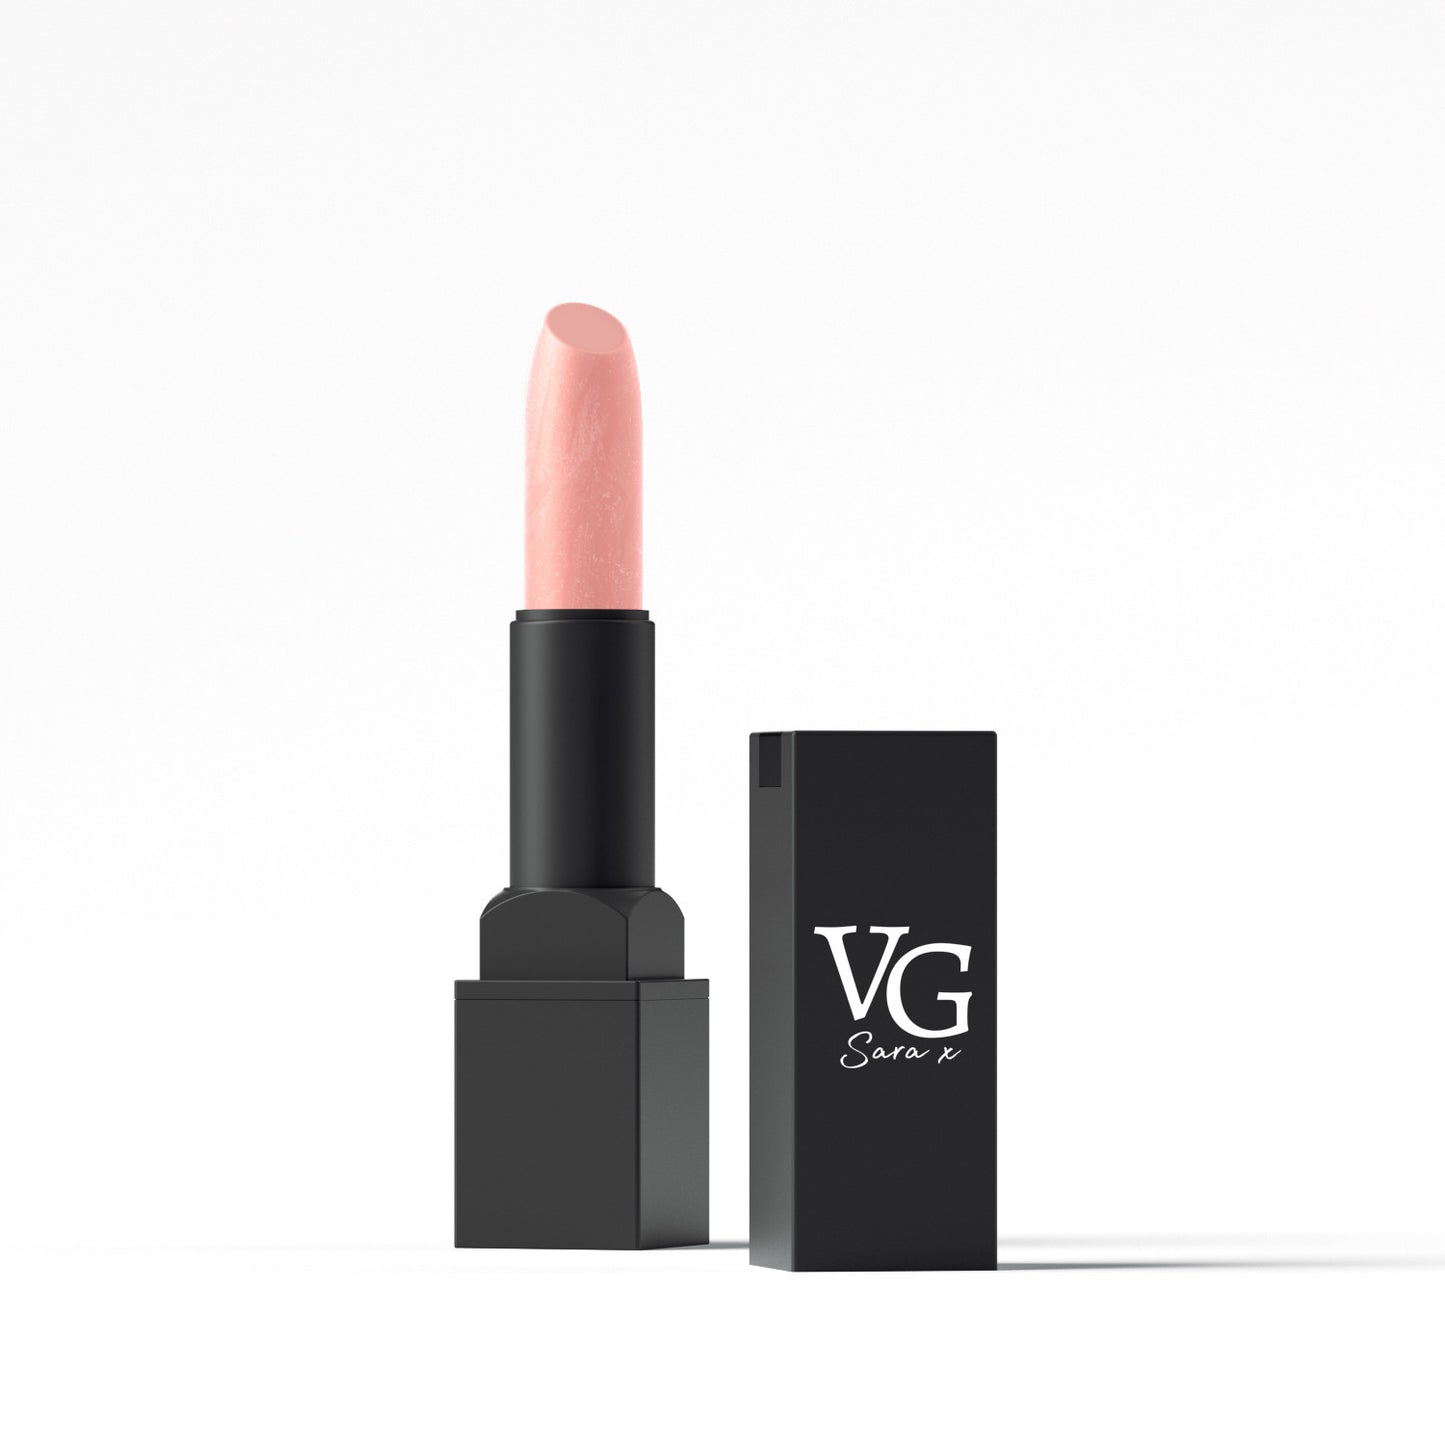 VG logo featured on Naturally Long-Lasting Lipstick tube